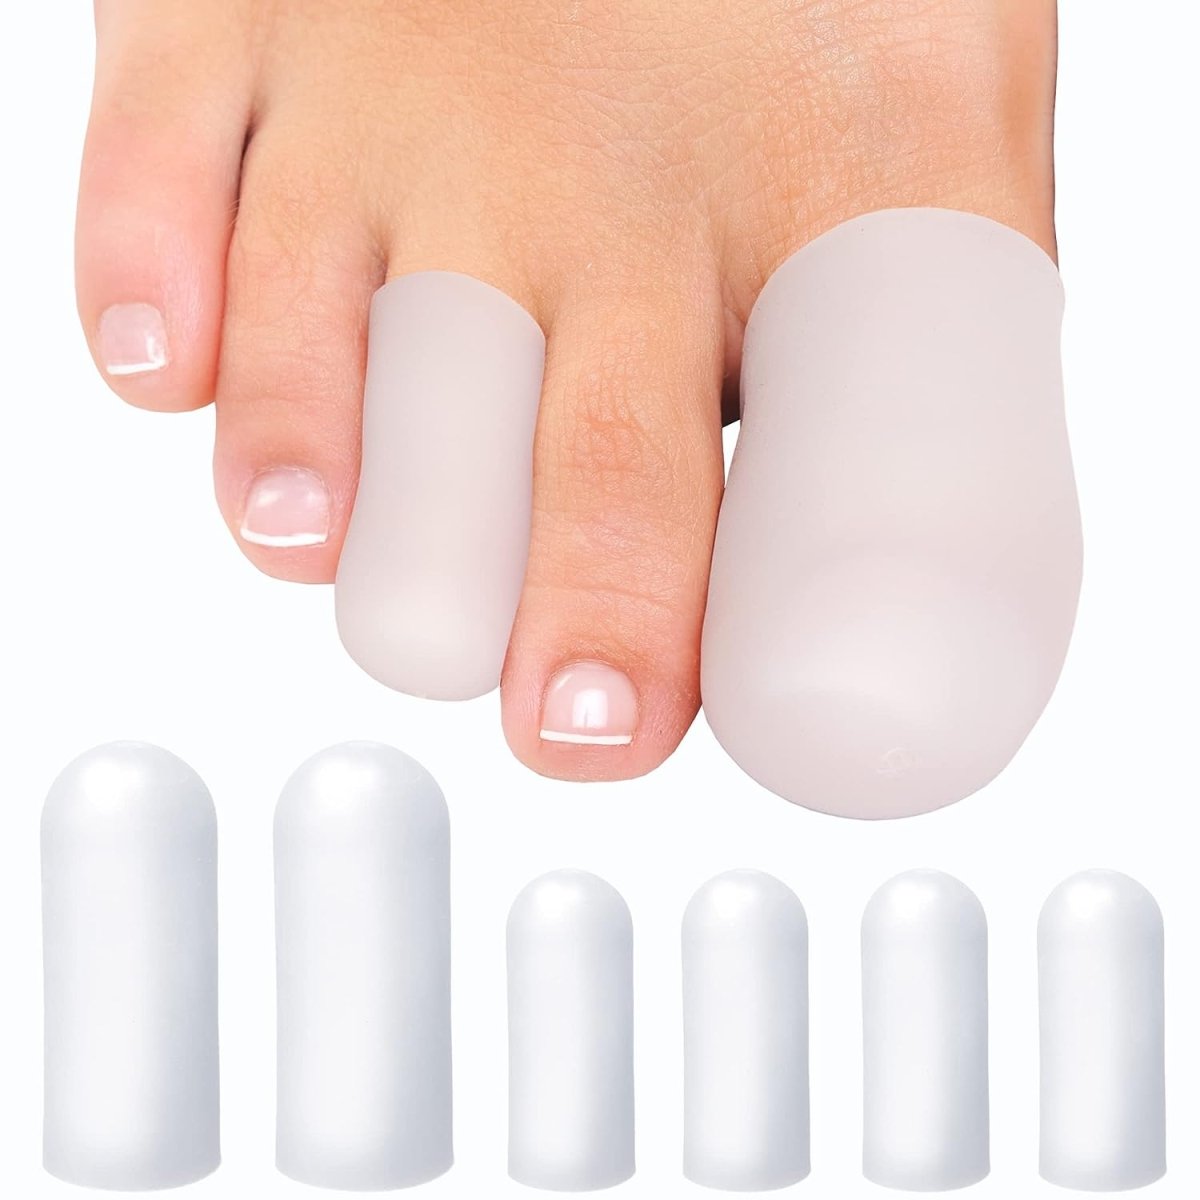 6pcs Silicone Gel Toe Cap Provide Relief from Missing/Ingrown Toenails, Corns, Calluses, Blisters, Hammer Toes (White) Foot Supports- Royalkart - The Urban Store